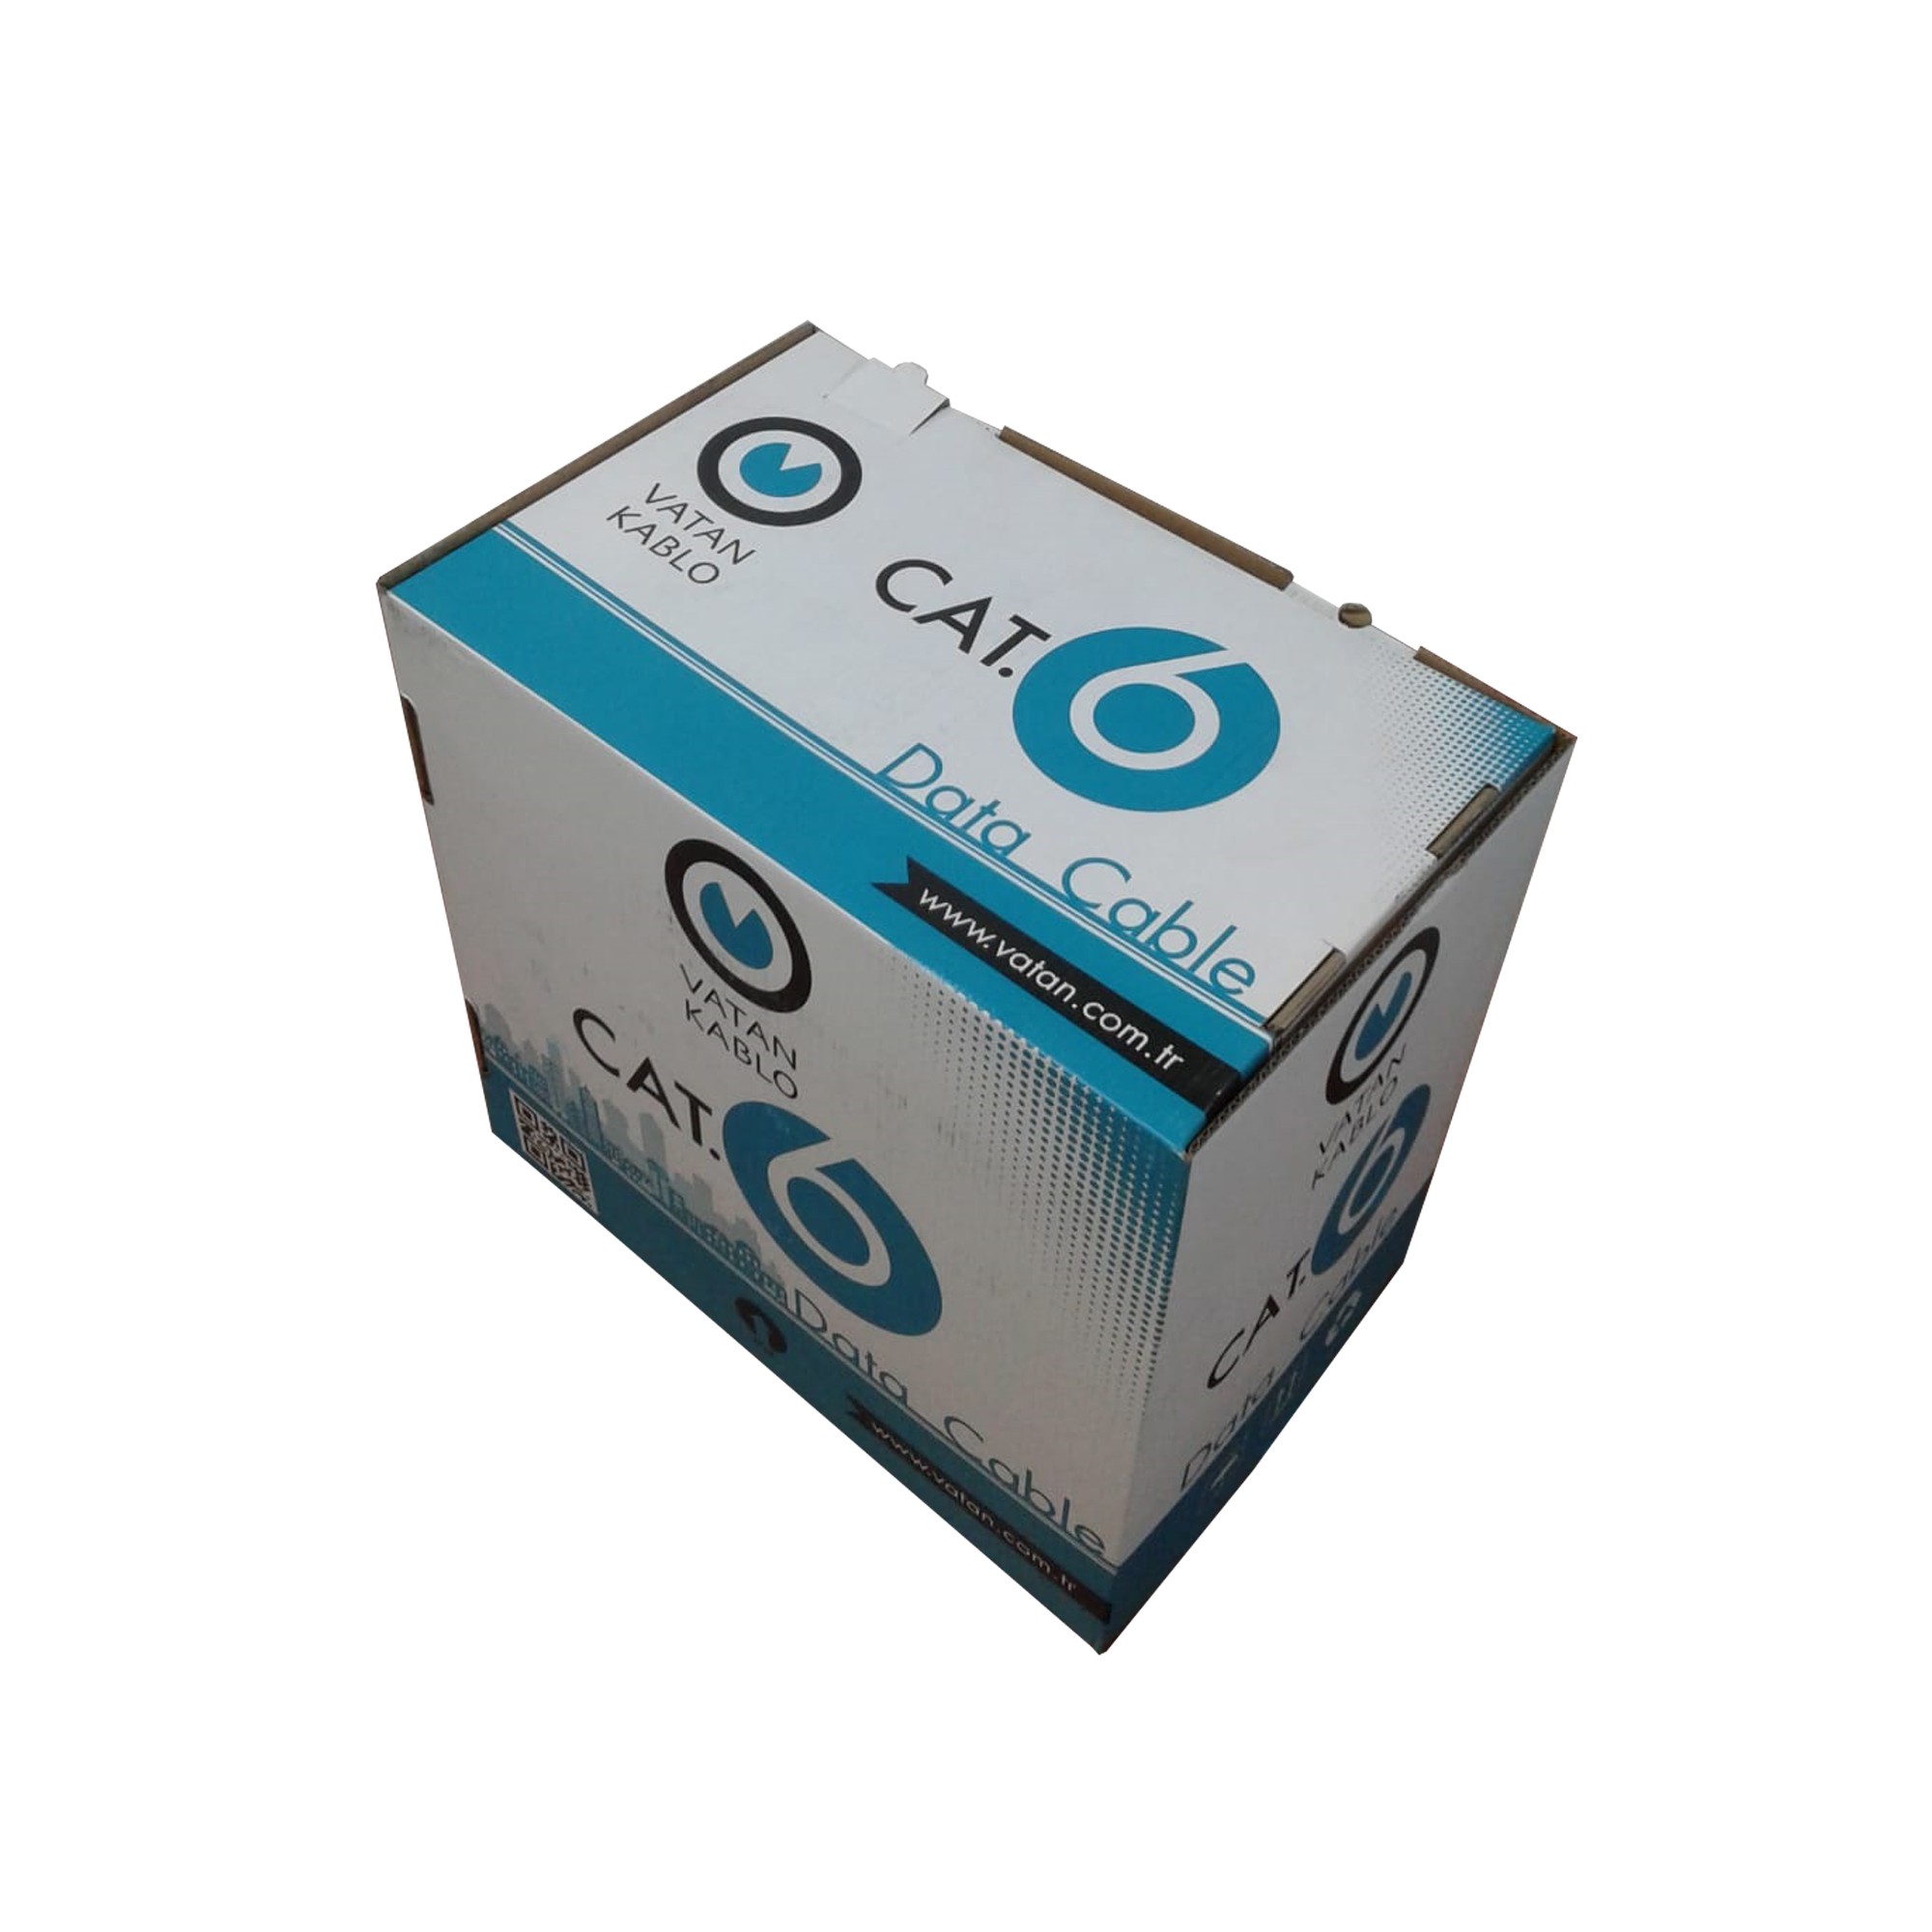 Vatan Cat6 23 Awg Network Cable